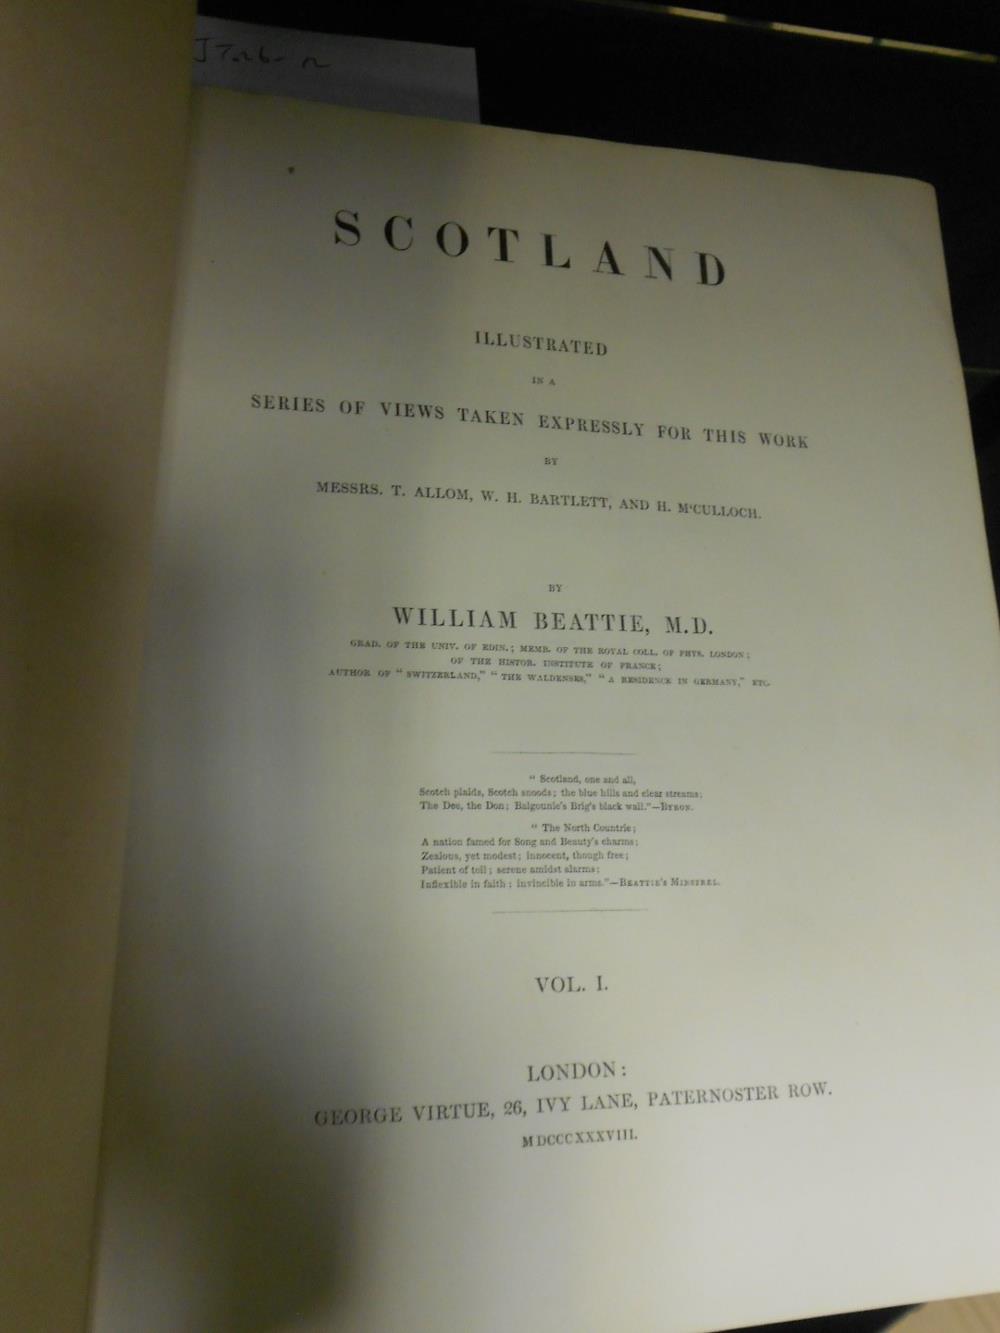 BEATTIE (William) Scotland, London: George Virtue 1838, 2 vols., 4to, engravings by Bartlett, - Image 2 of 3